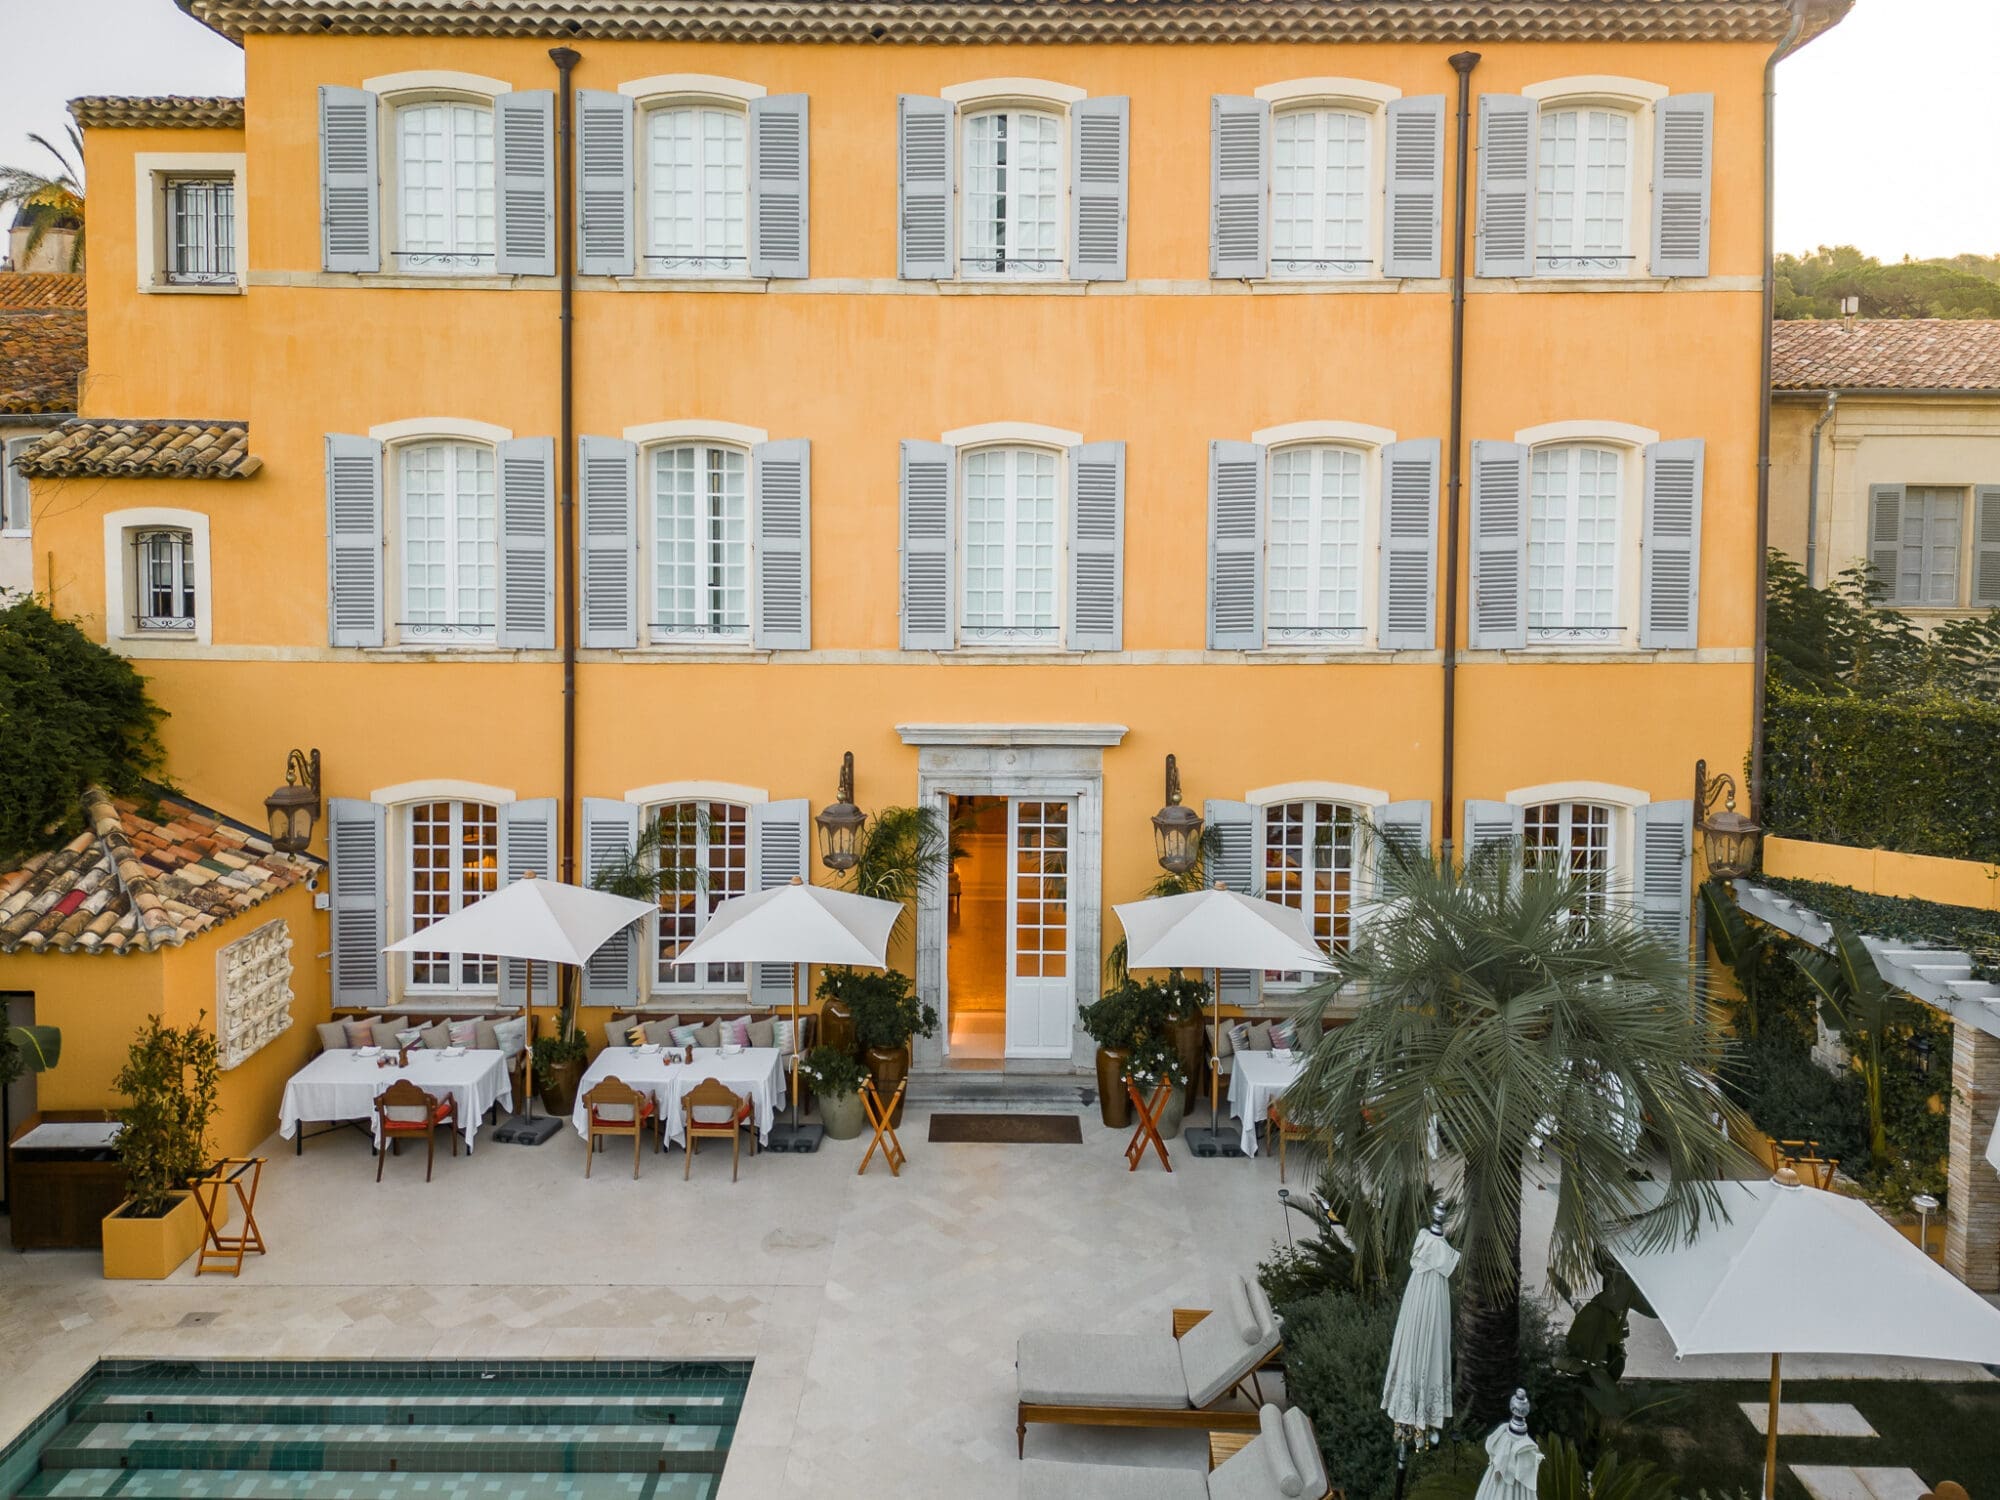 The exterior of Airelles Pan Deï Palais Saint Tropez, a yellow building with shuttered windows and a turquoise pool in the foreground.